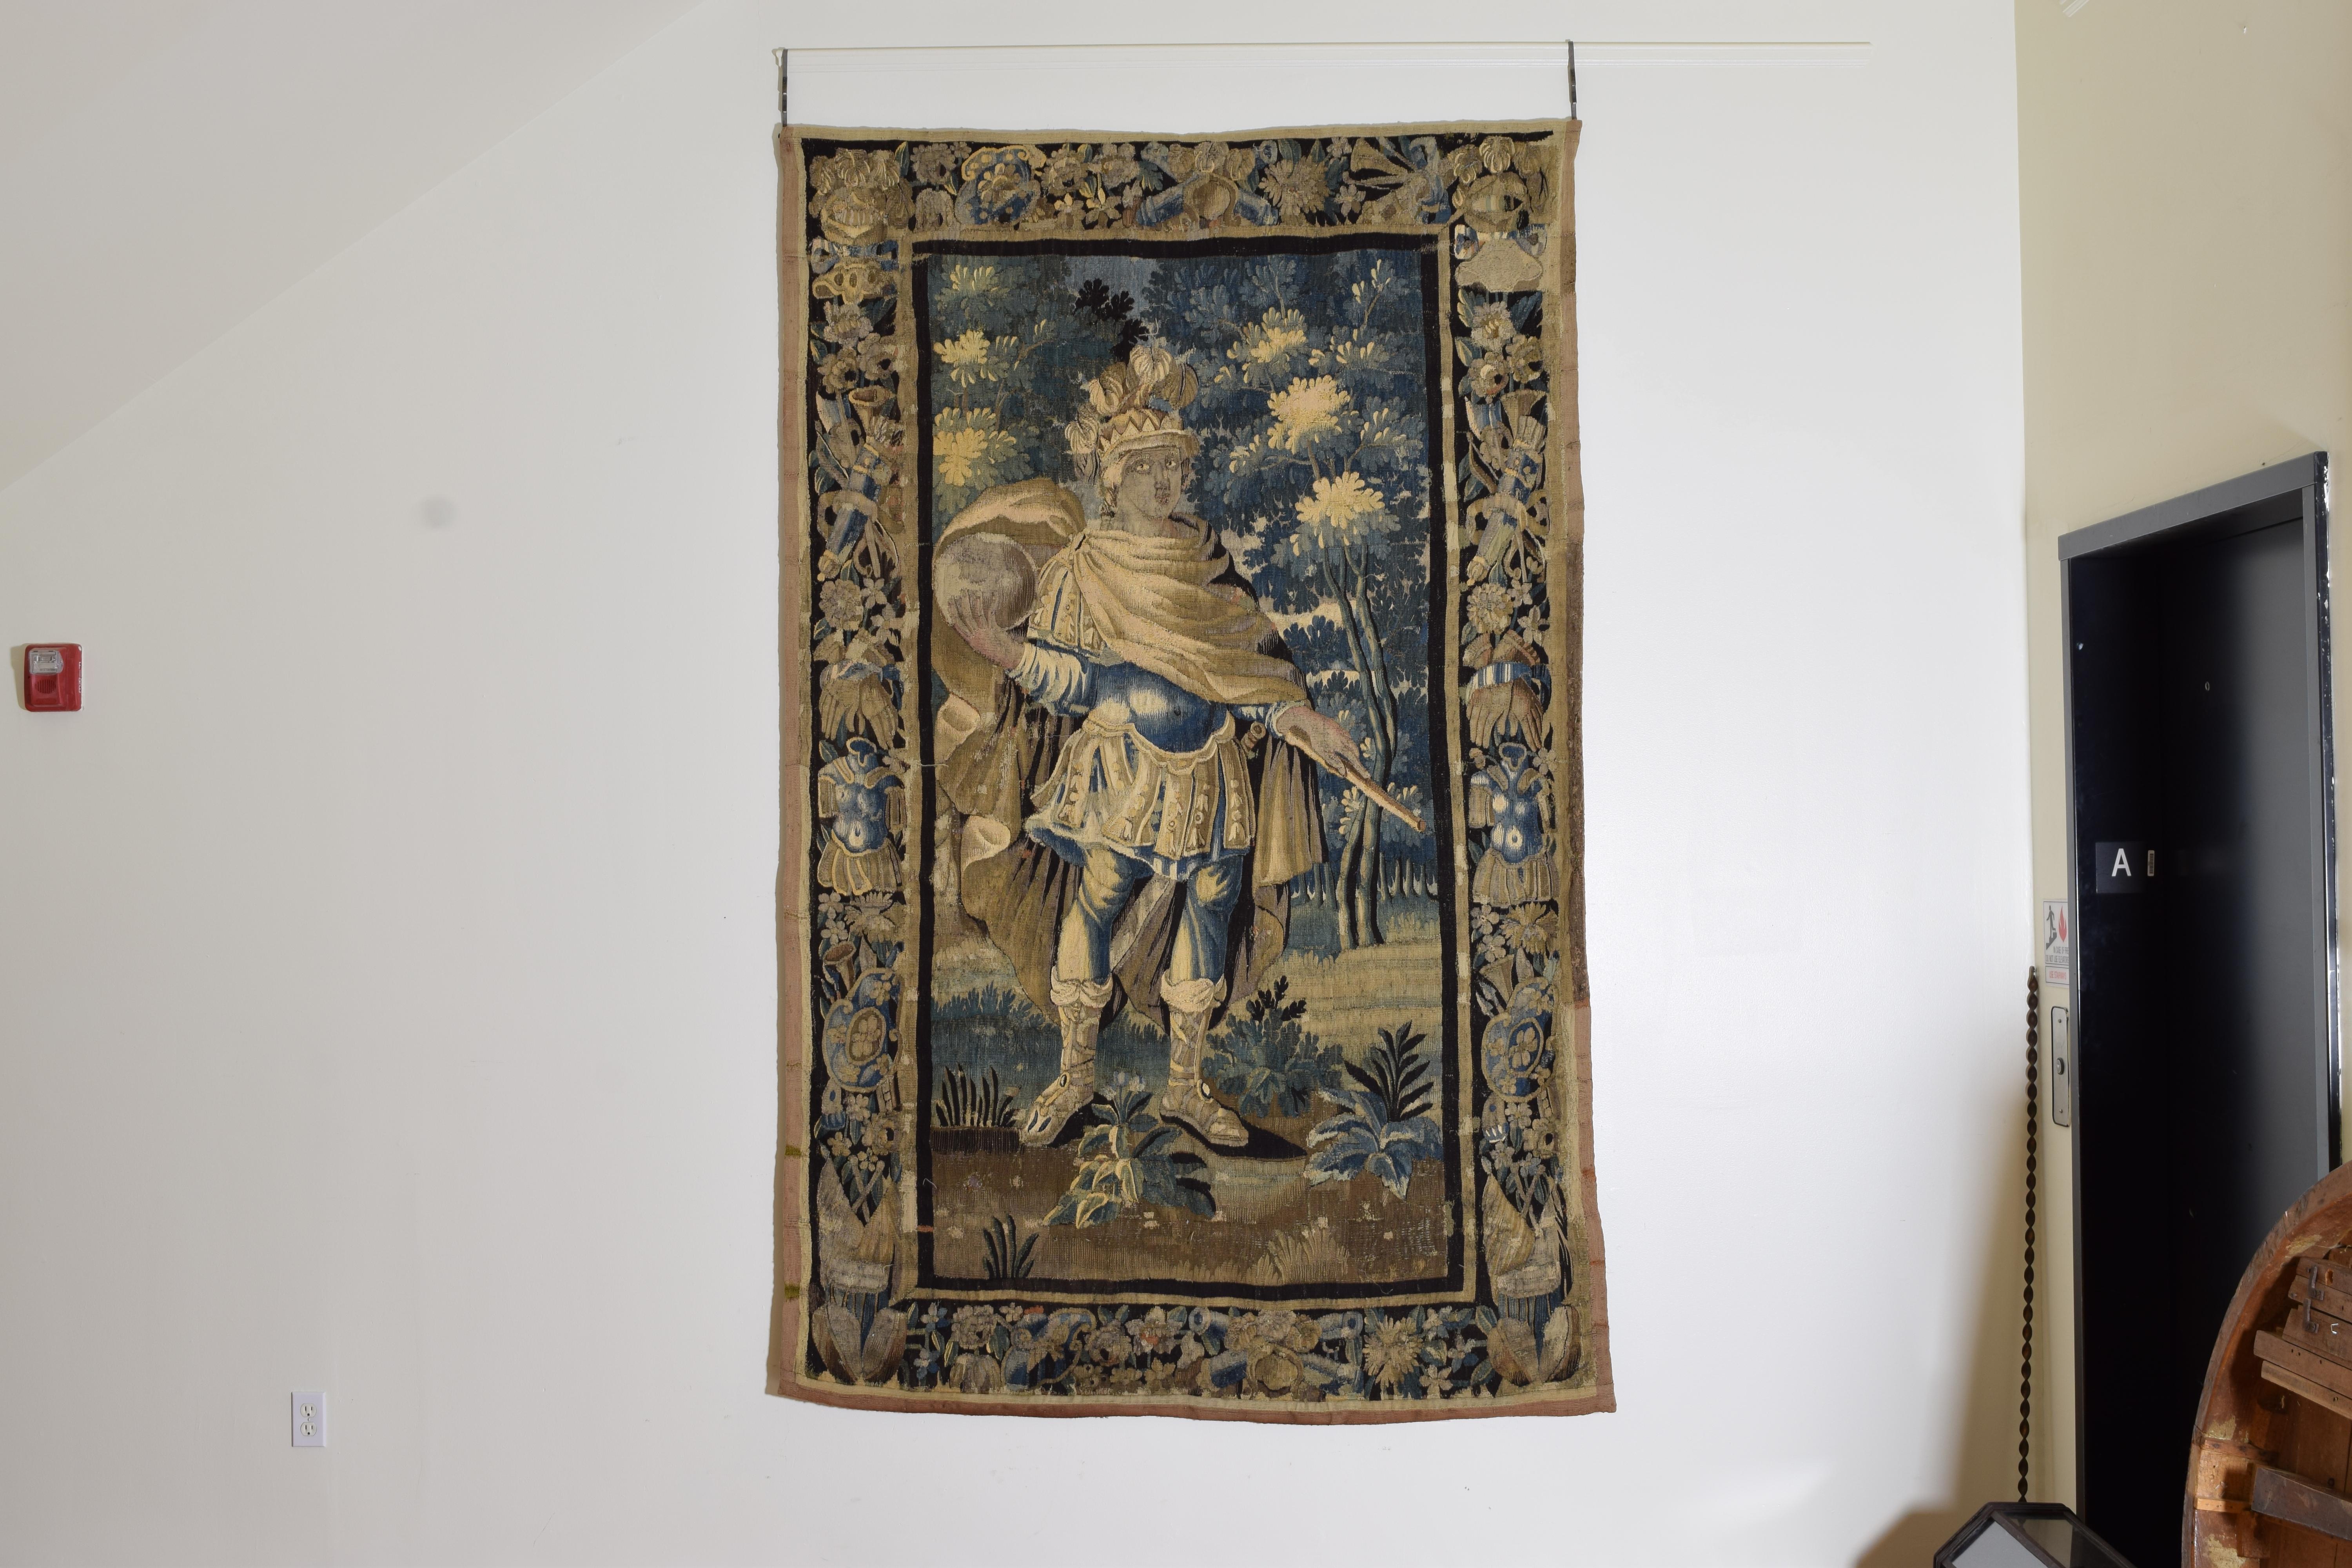 The tapestry depicting King Solomon as a warrior king standing with a globe and staff in his hands framed within a border of armaments, flora, and fauna, the tapestry recently restored and now with a new backing and hanging sleeve